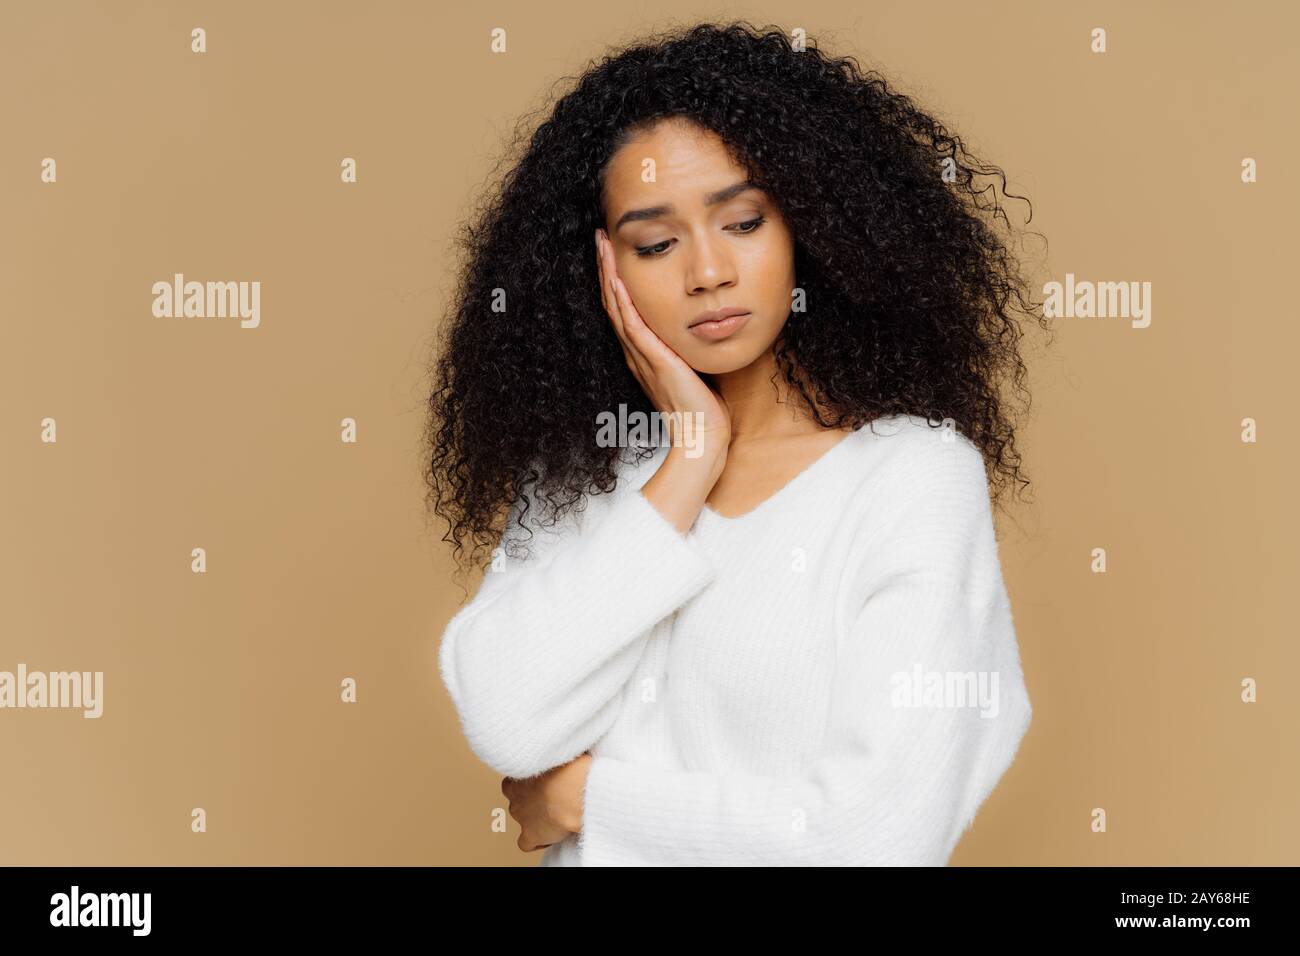 Melancholic sad lonely woman focused down with thoughtful expression, keeps hand on cheek, has calm expression, wears white sweater, has curly hair, i Stock Photo